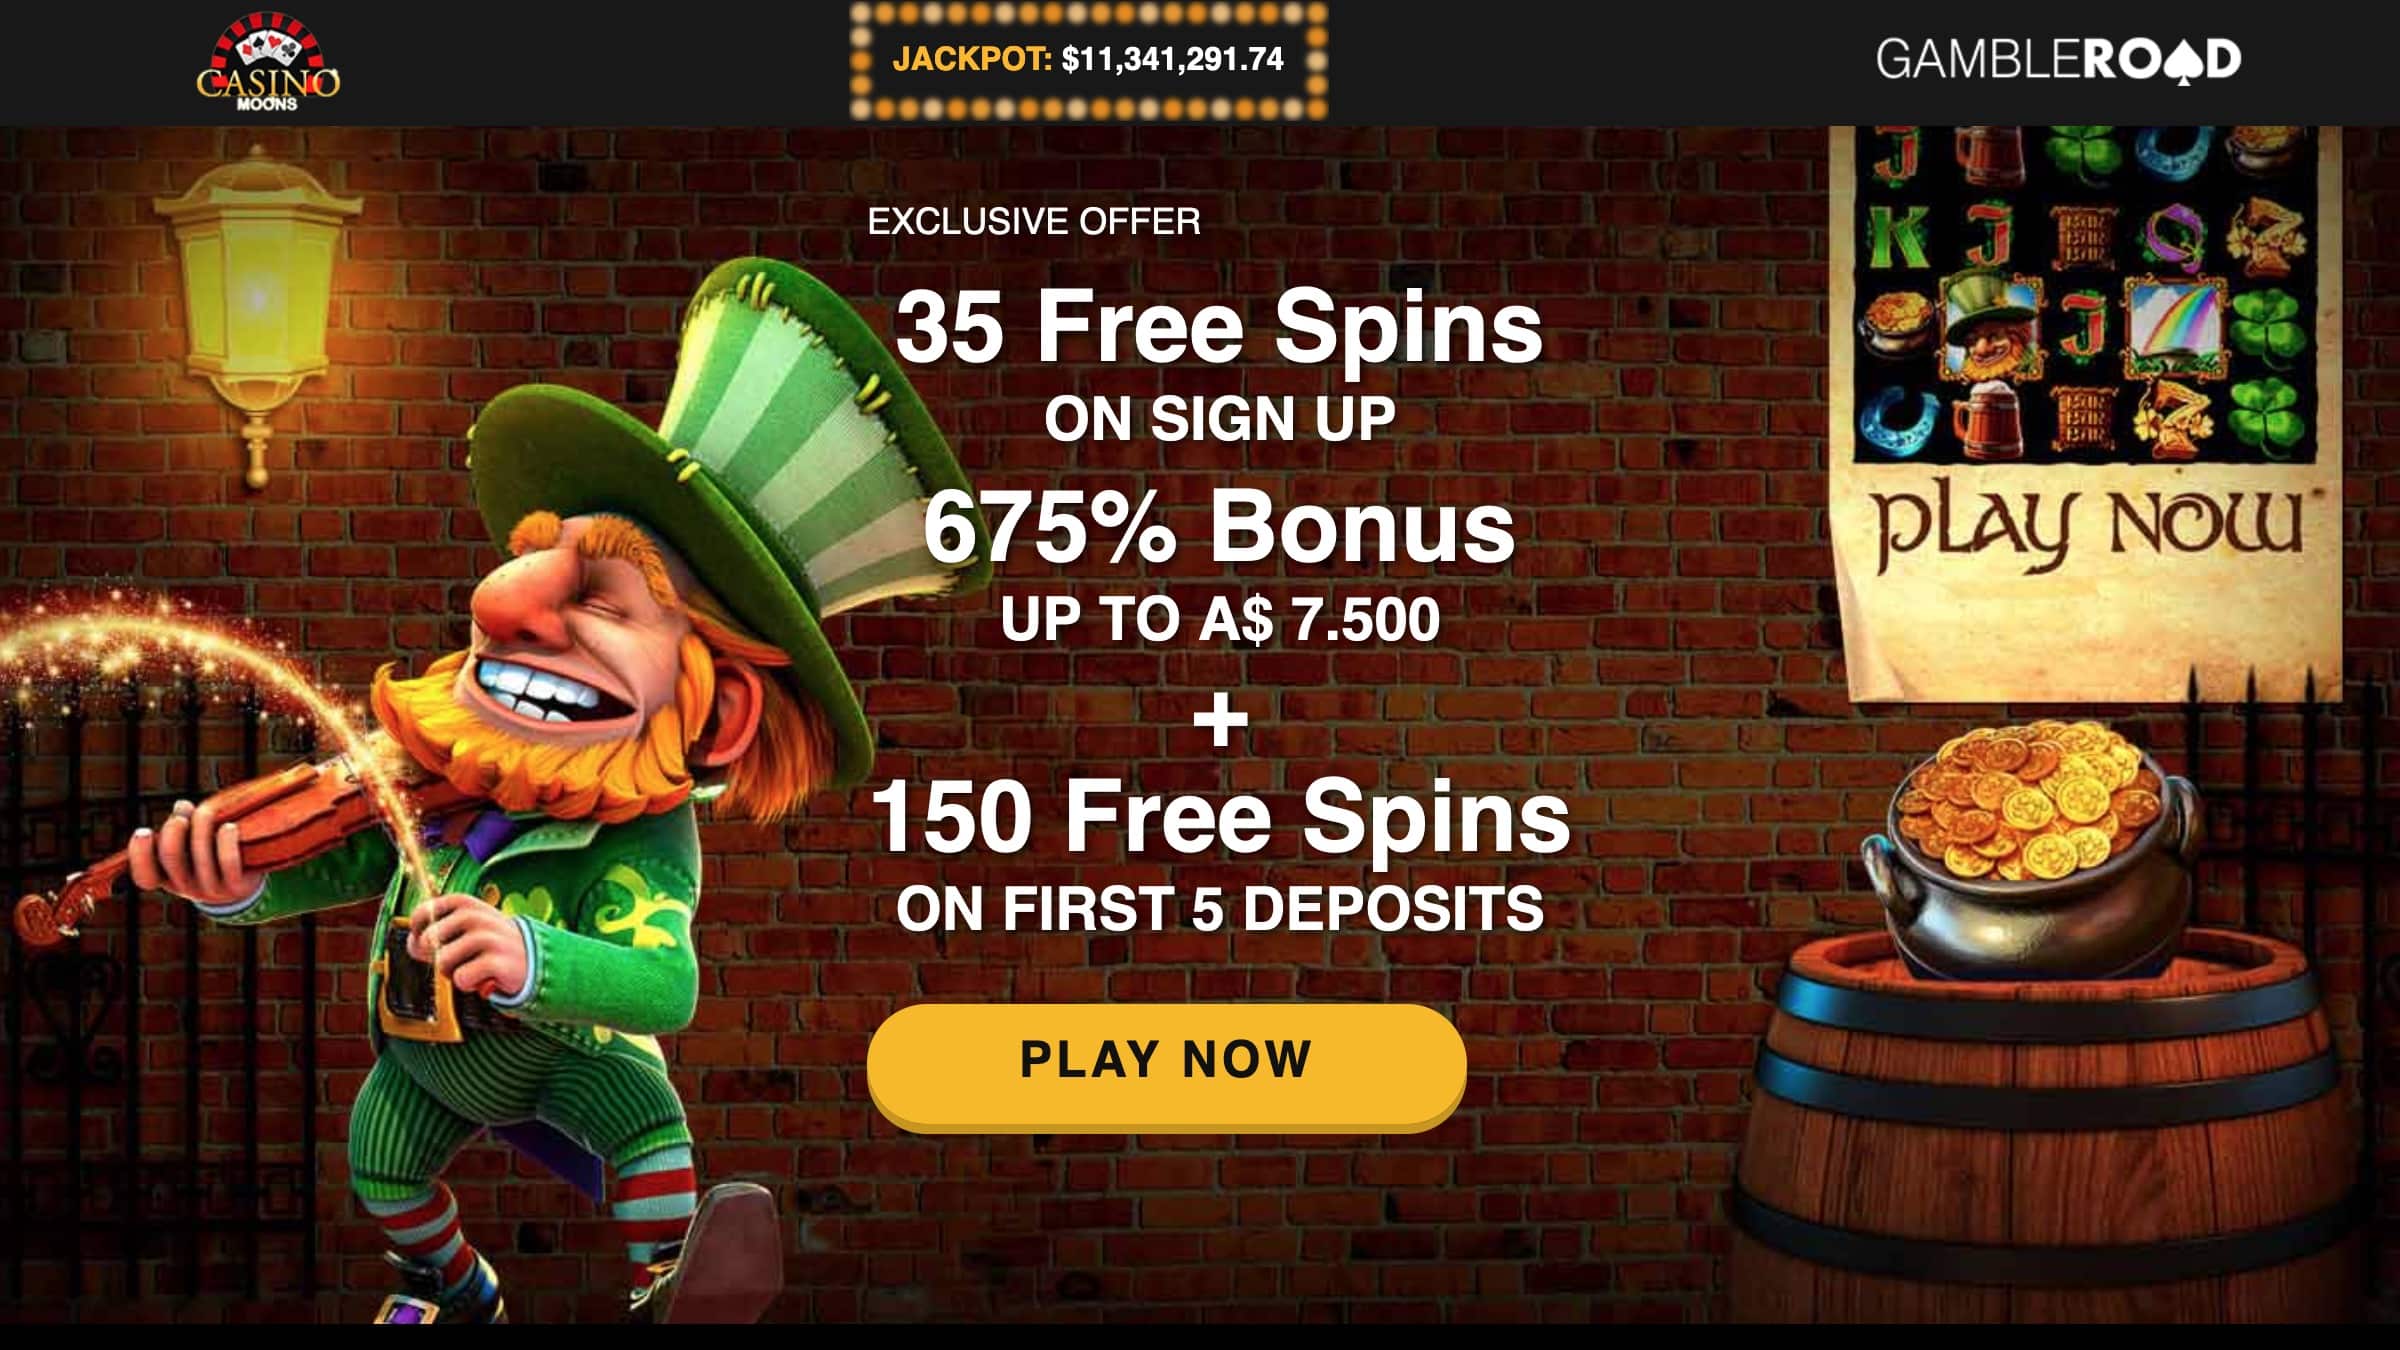 casino moons $ free spins